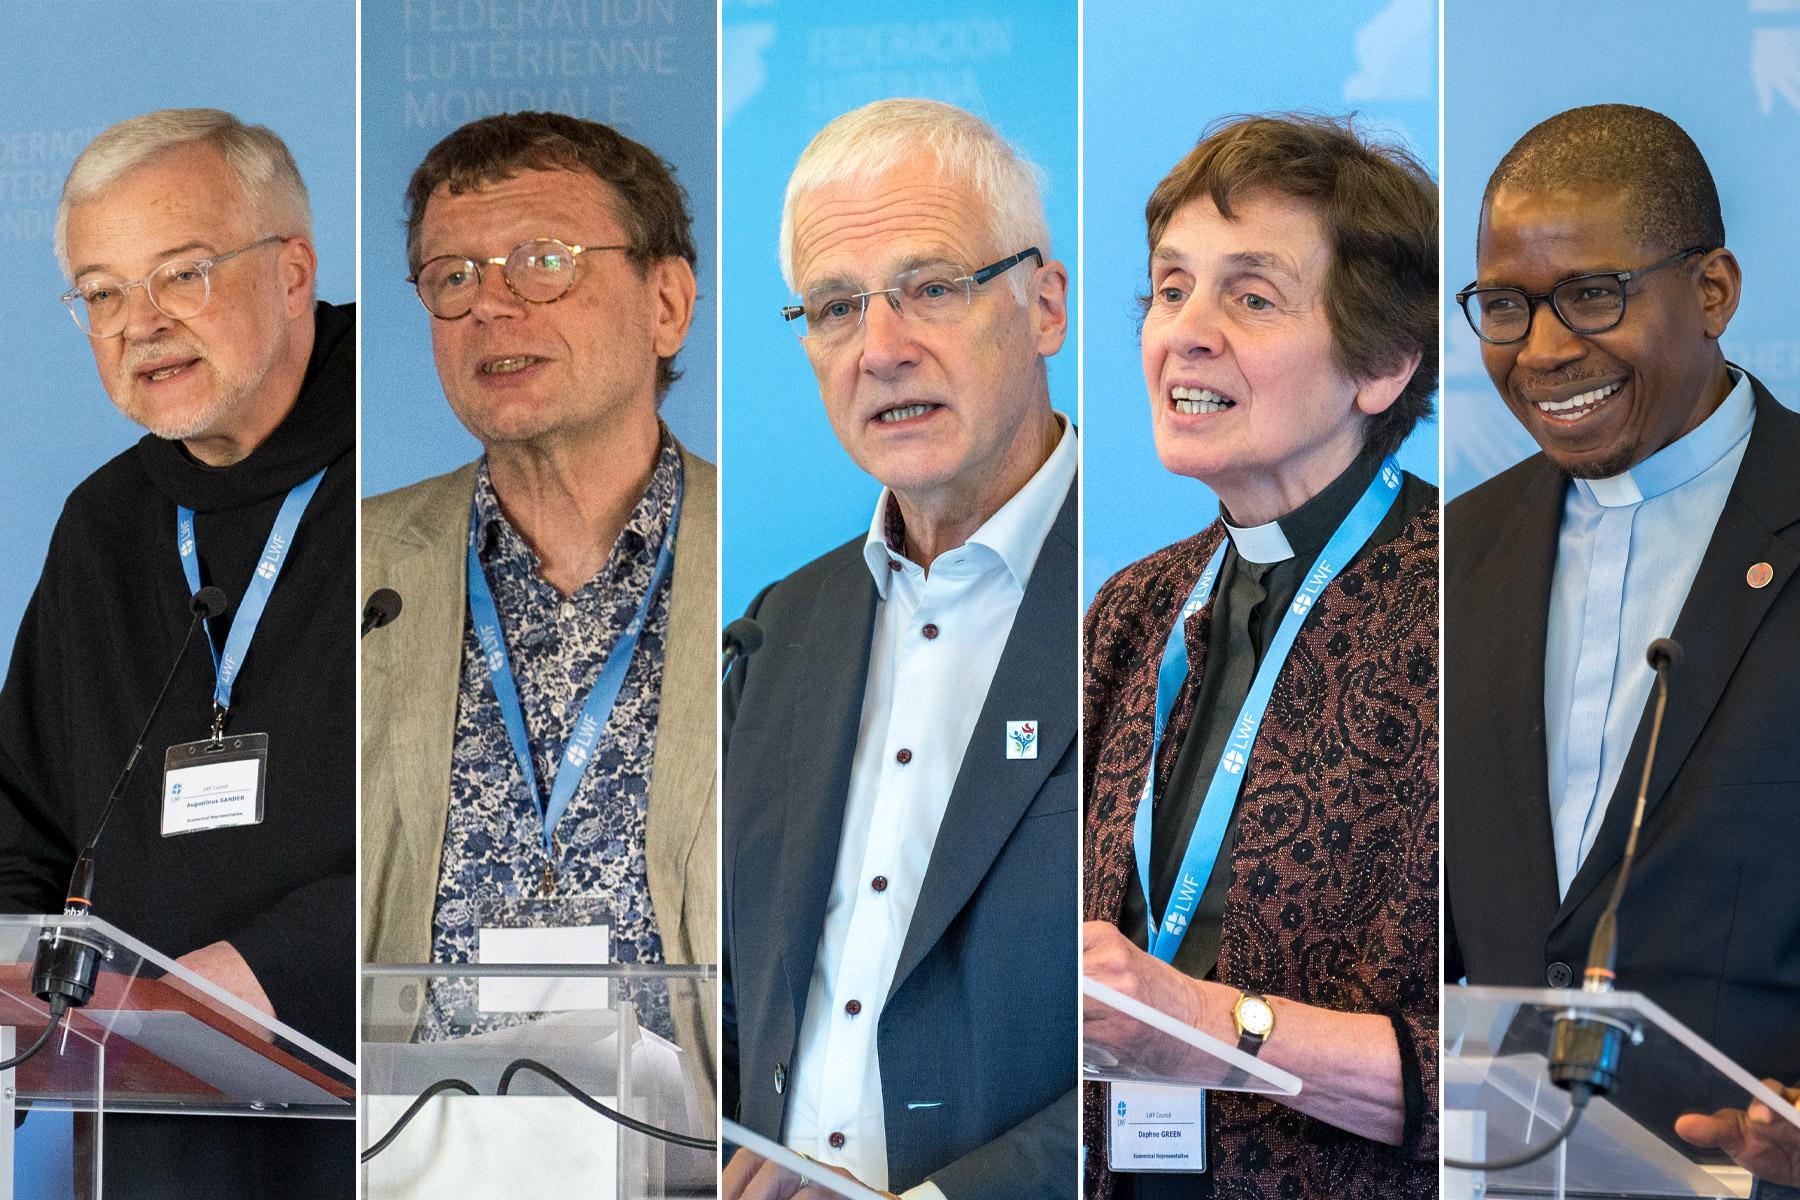 Leaders of global church bodies greeting the LWF at its Council meeting expressed hope and commitment for continued collaboration in dialogues, shared witness and service to the world. Photo: LWF/Albin Hillert